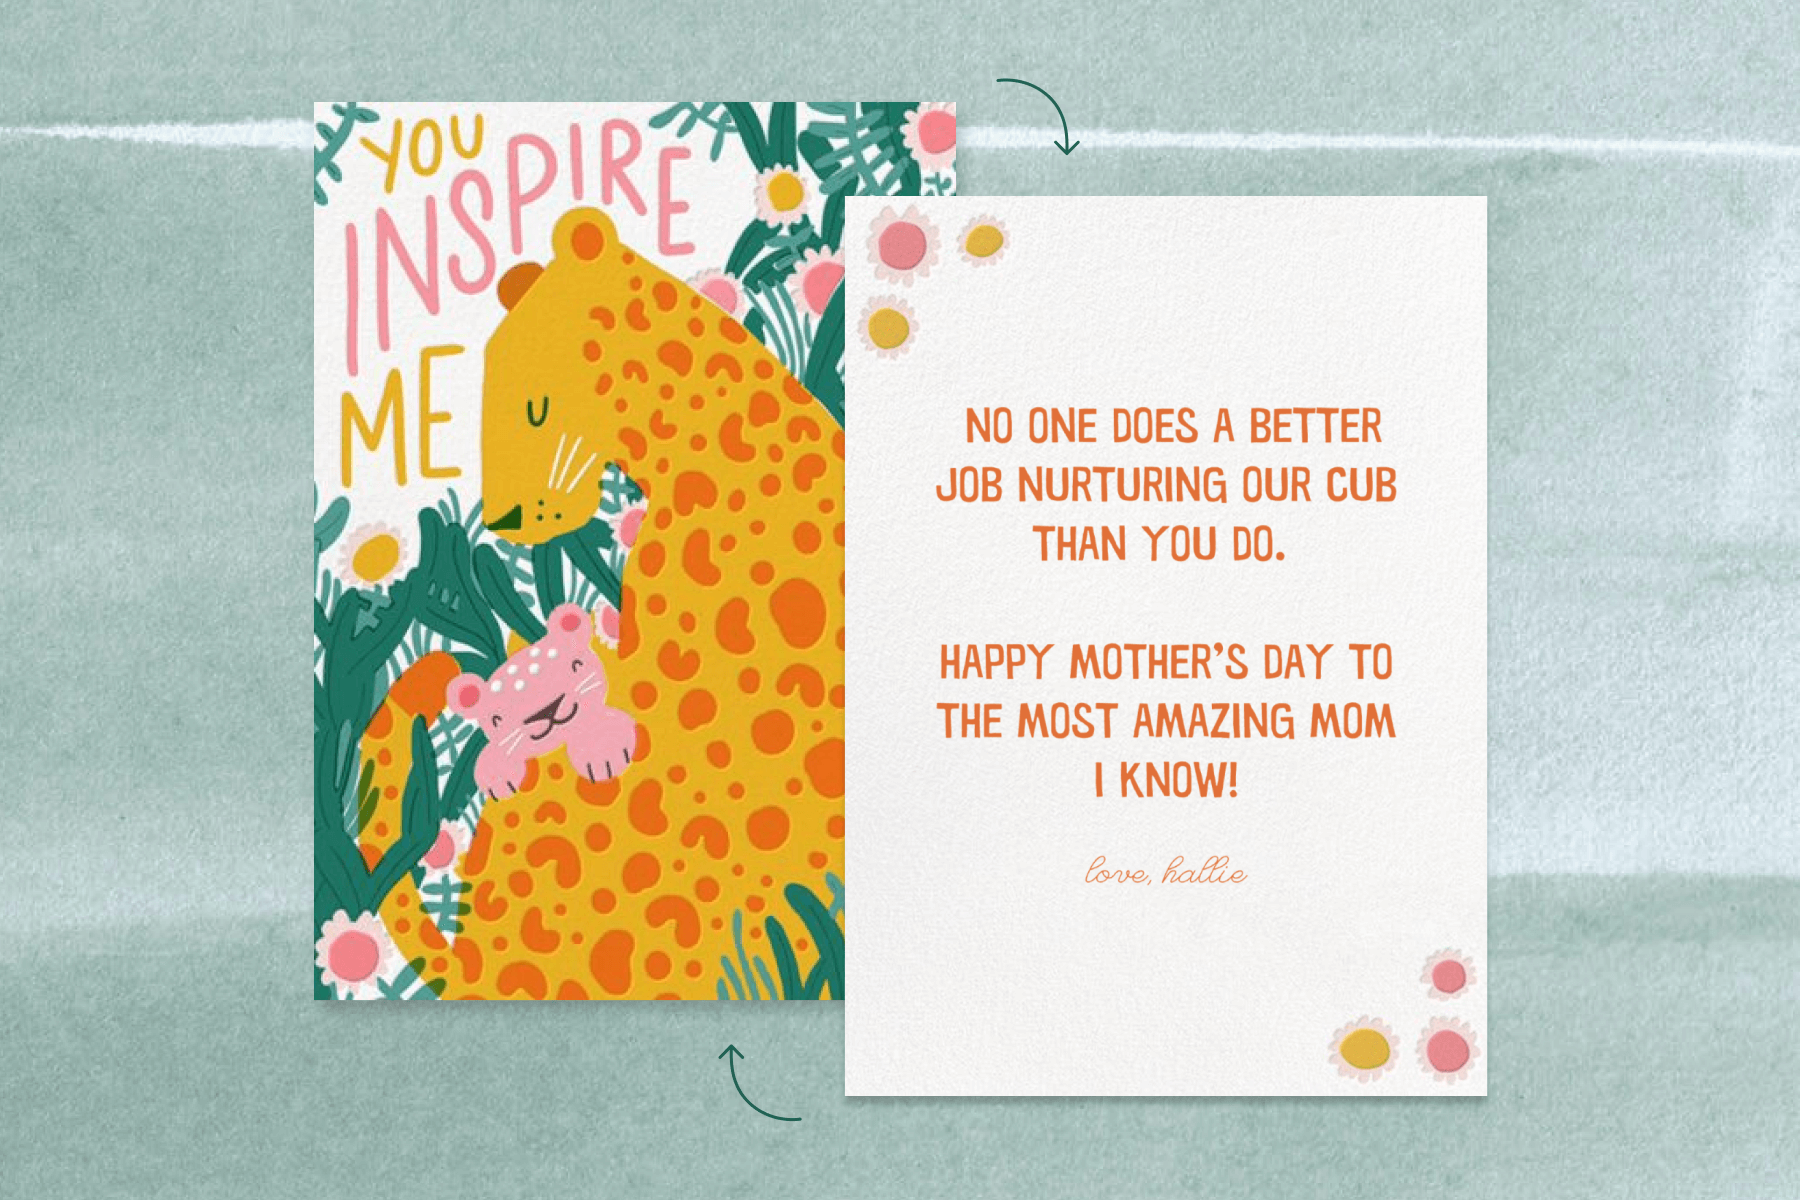 An illustrated panther and cub Mother’s Day card showing one of the messages suggested below. The card reads “You inspire me.”